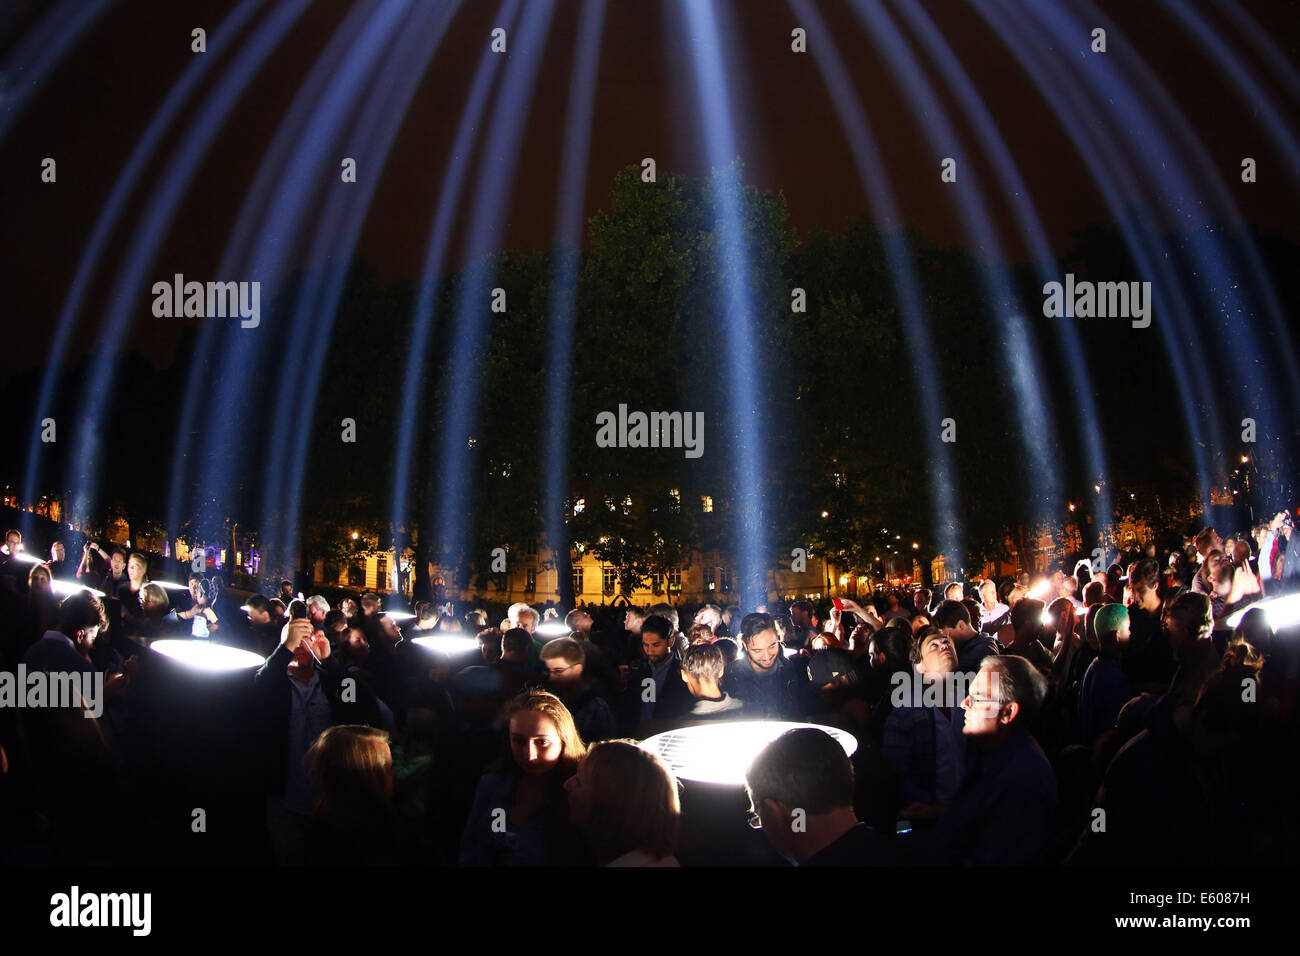 London, UK. 9th August 2014. Spectra light installation by Ryoji Ikeda marking the Centenary of the First World War as part of Lights Out in London continues to draw the crowds shortly before it ends on 11th August. Credit:  Paul Brown/Alamy Live News Stock Photo